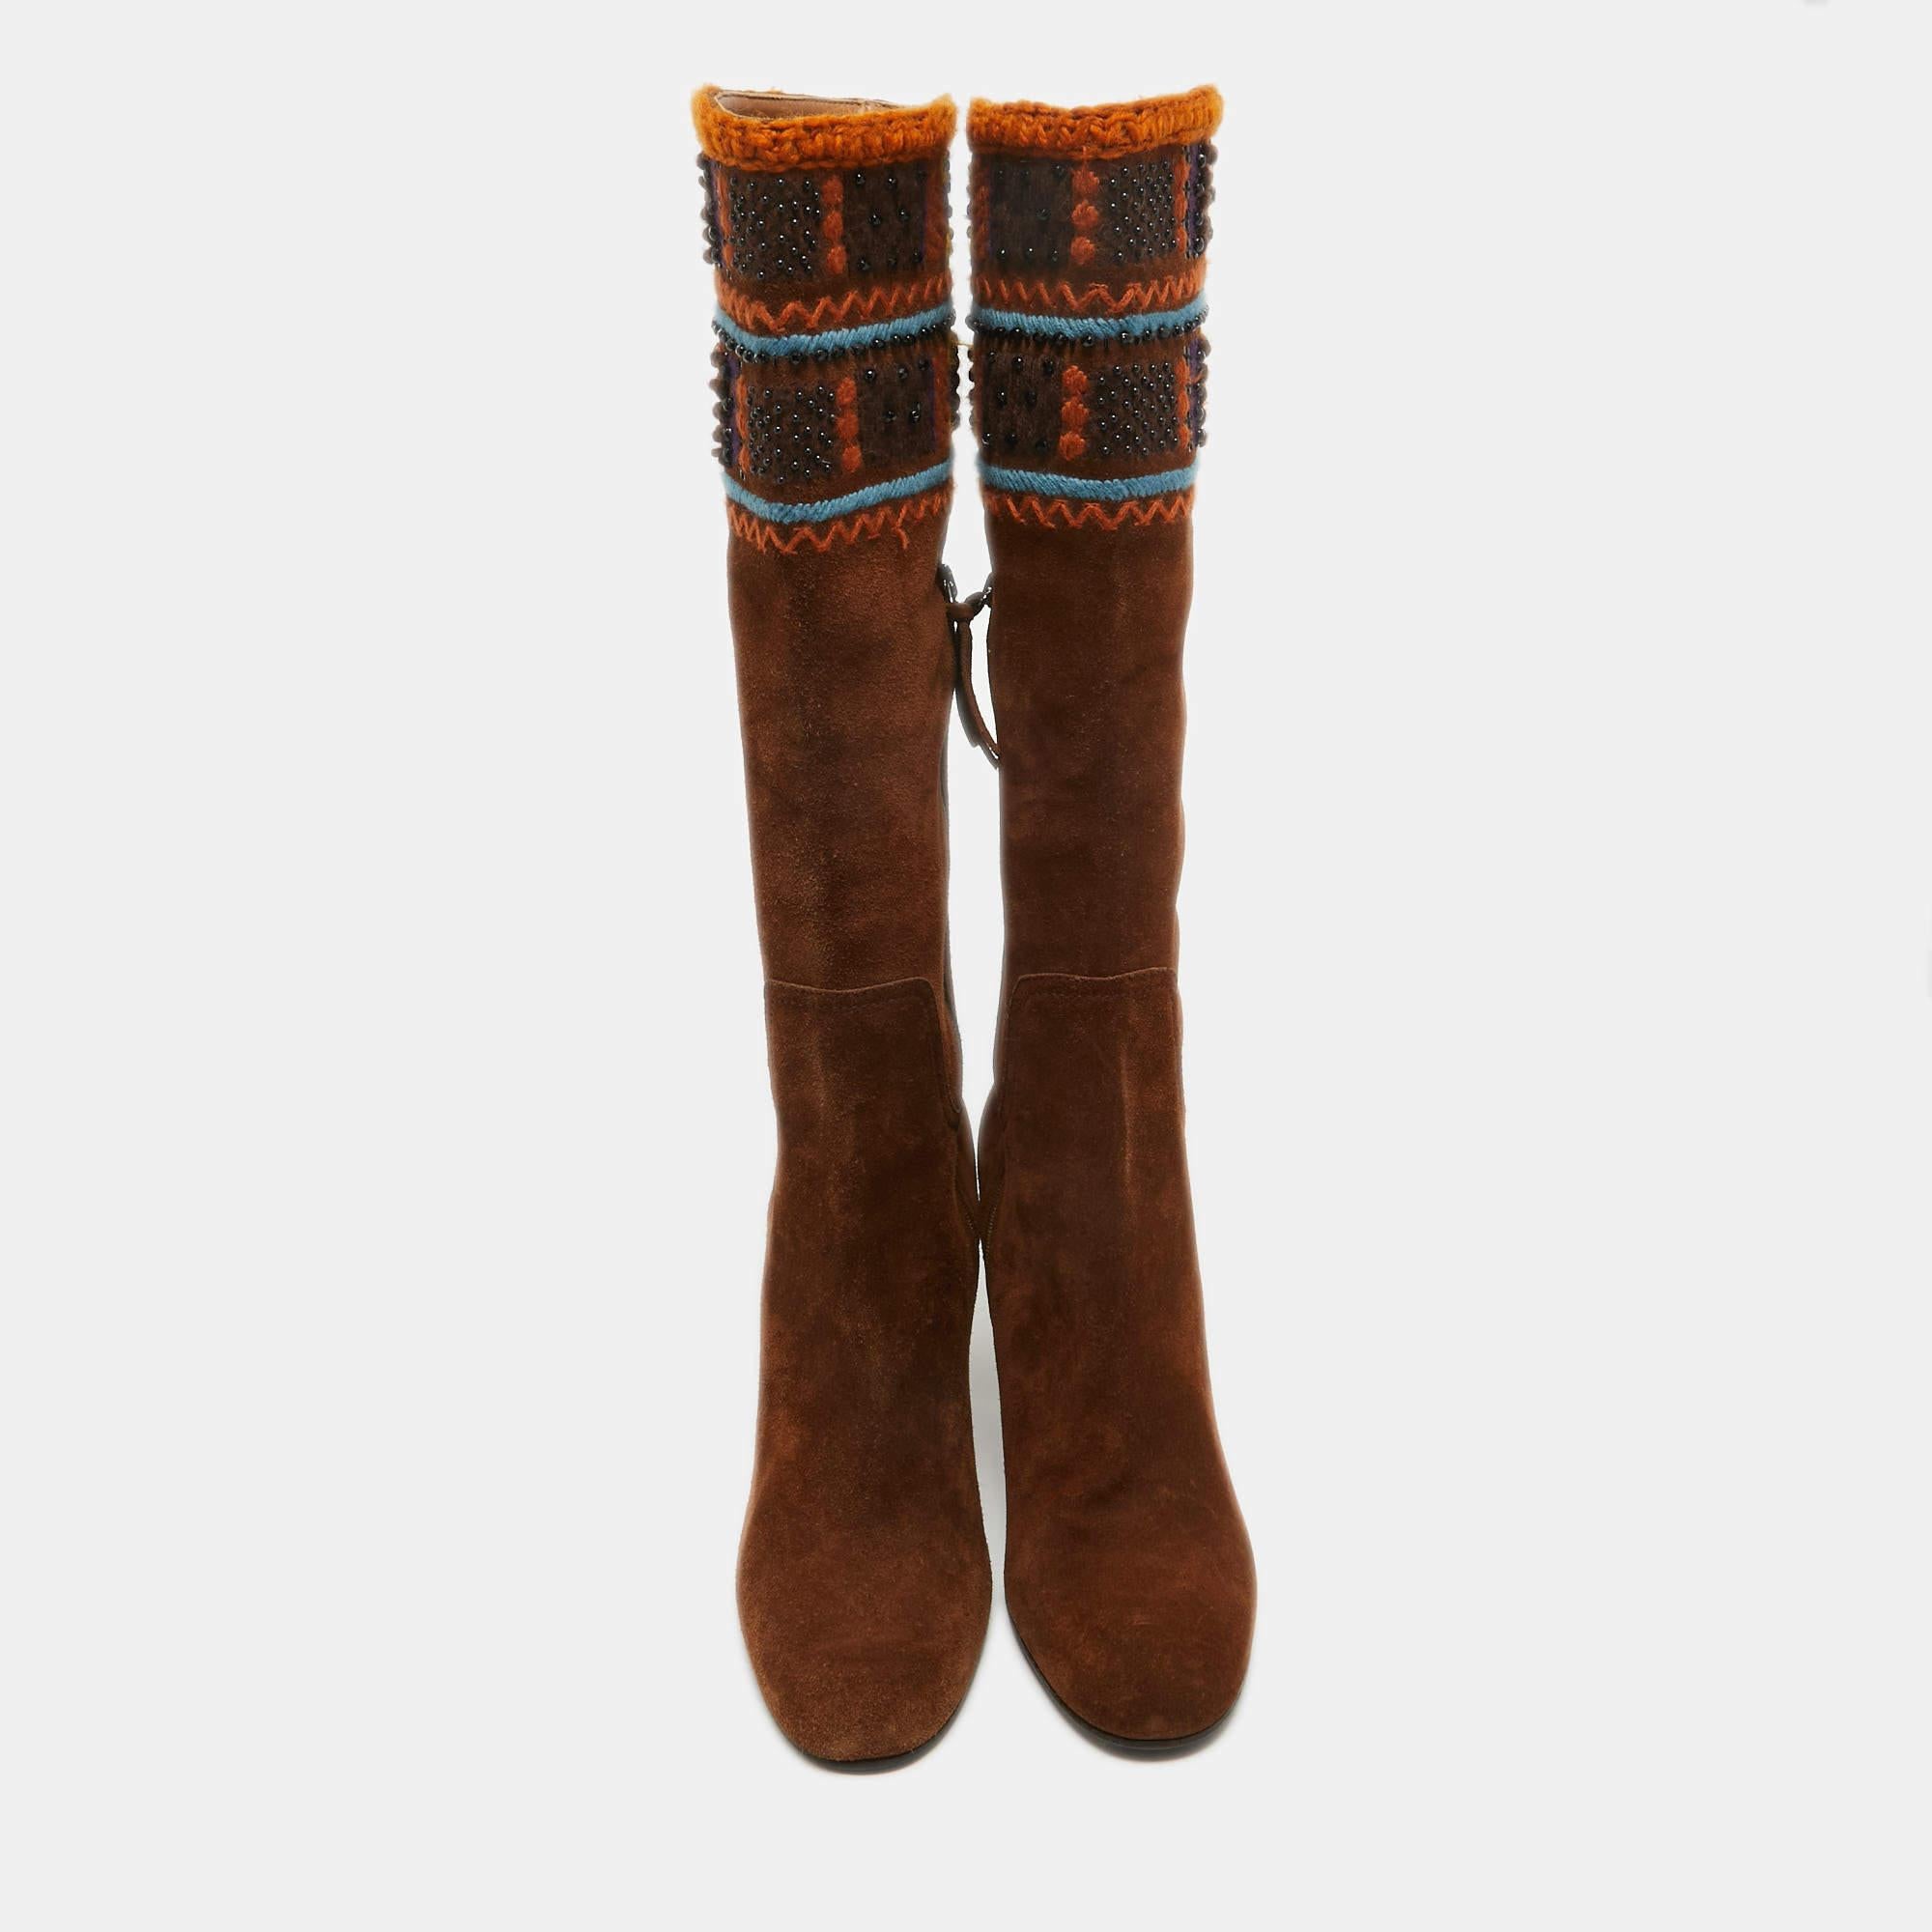 Miu Miu Brown Suede Embellished Knee Length Boots Size 40.5 In Good Condition For Sale In Dubai, Al Qouz 2